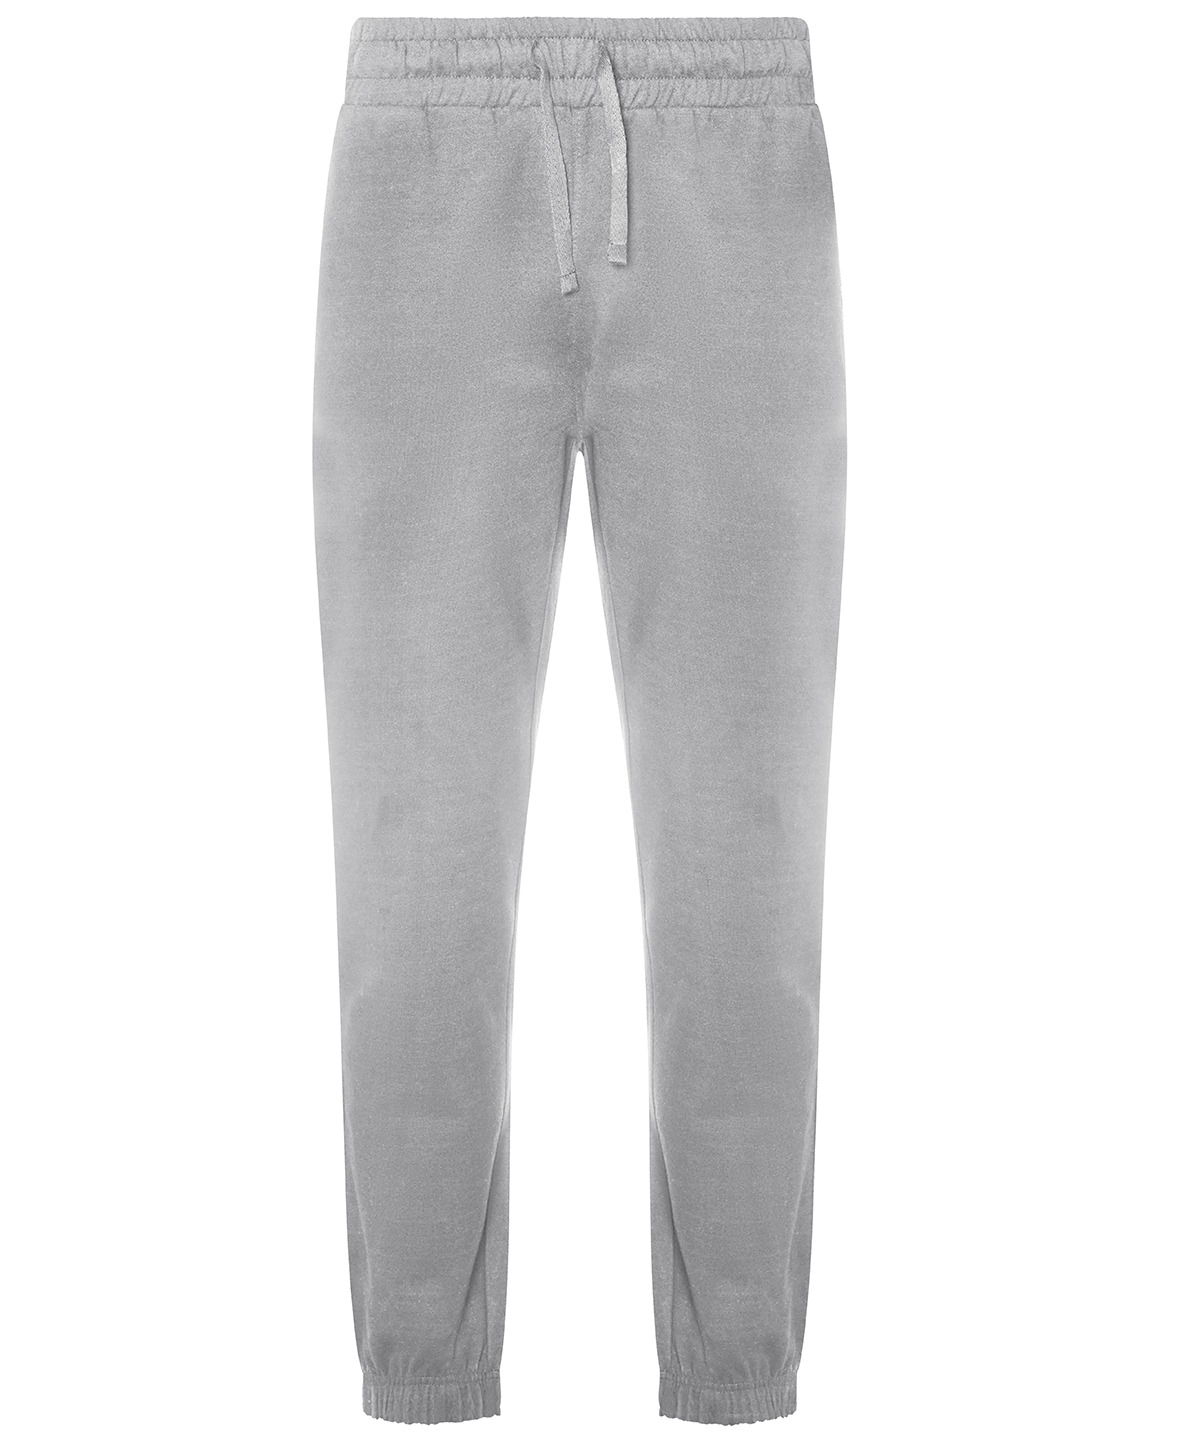 Crater Recycled Jog Pants Heather Grey Size XSmall